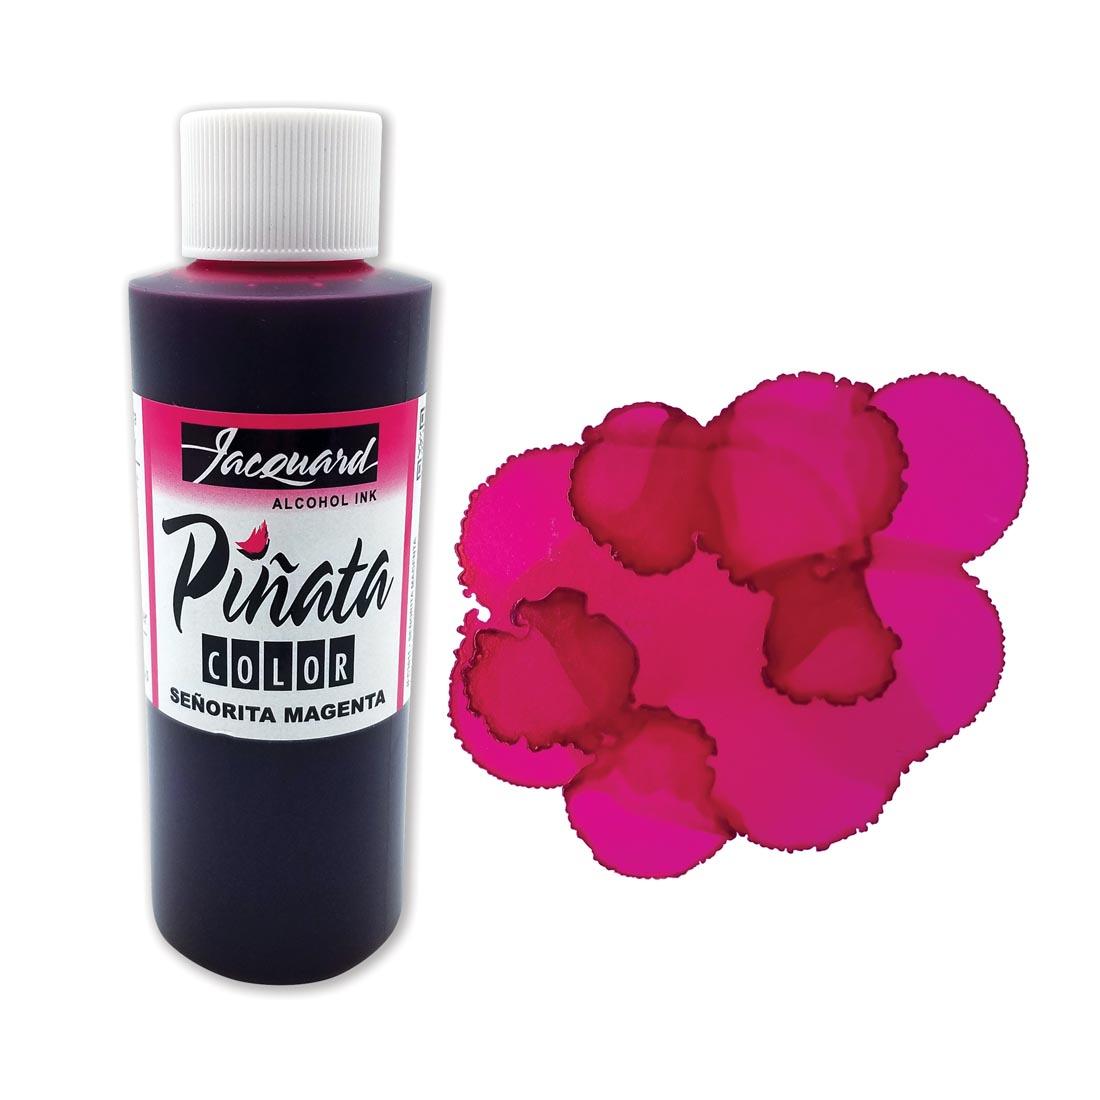 Bottle of Senorita Magenta Jacquard Pinata Color Alcohol Ink beside an example color swatch